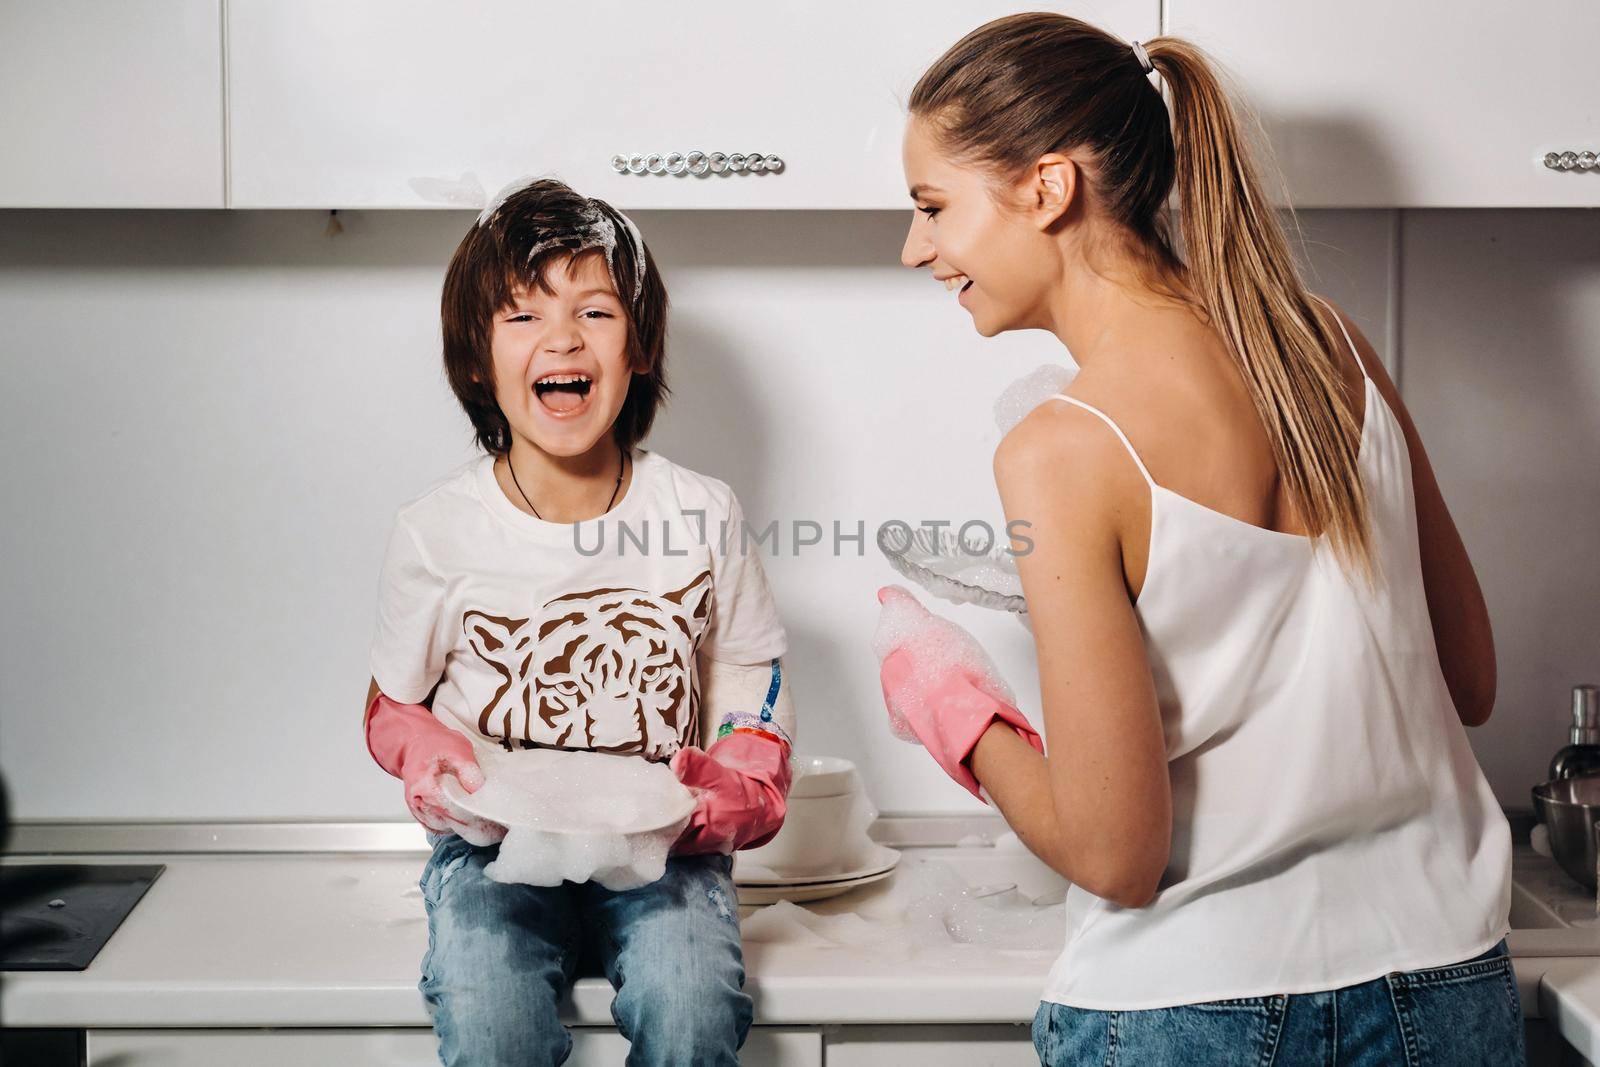 housewife mom in pink gloves washes dishes with her son by hand in the sink with detergent. A girl in white and a child with a cast cleans the house and washes dishes in homemade pink gloves.A child with a cast washes dishes and smiles.